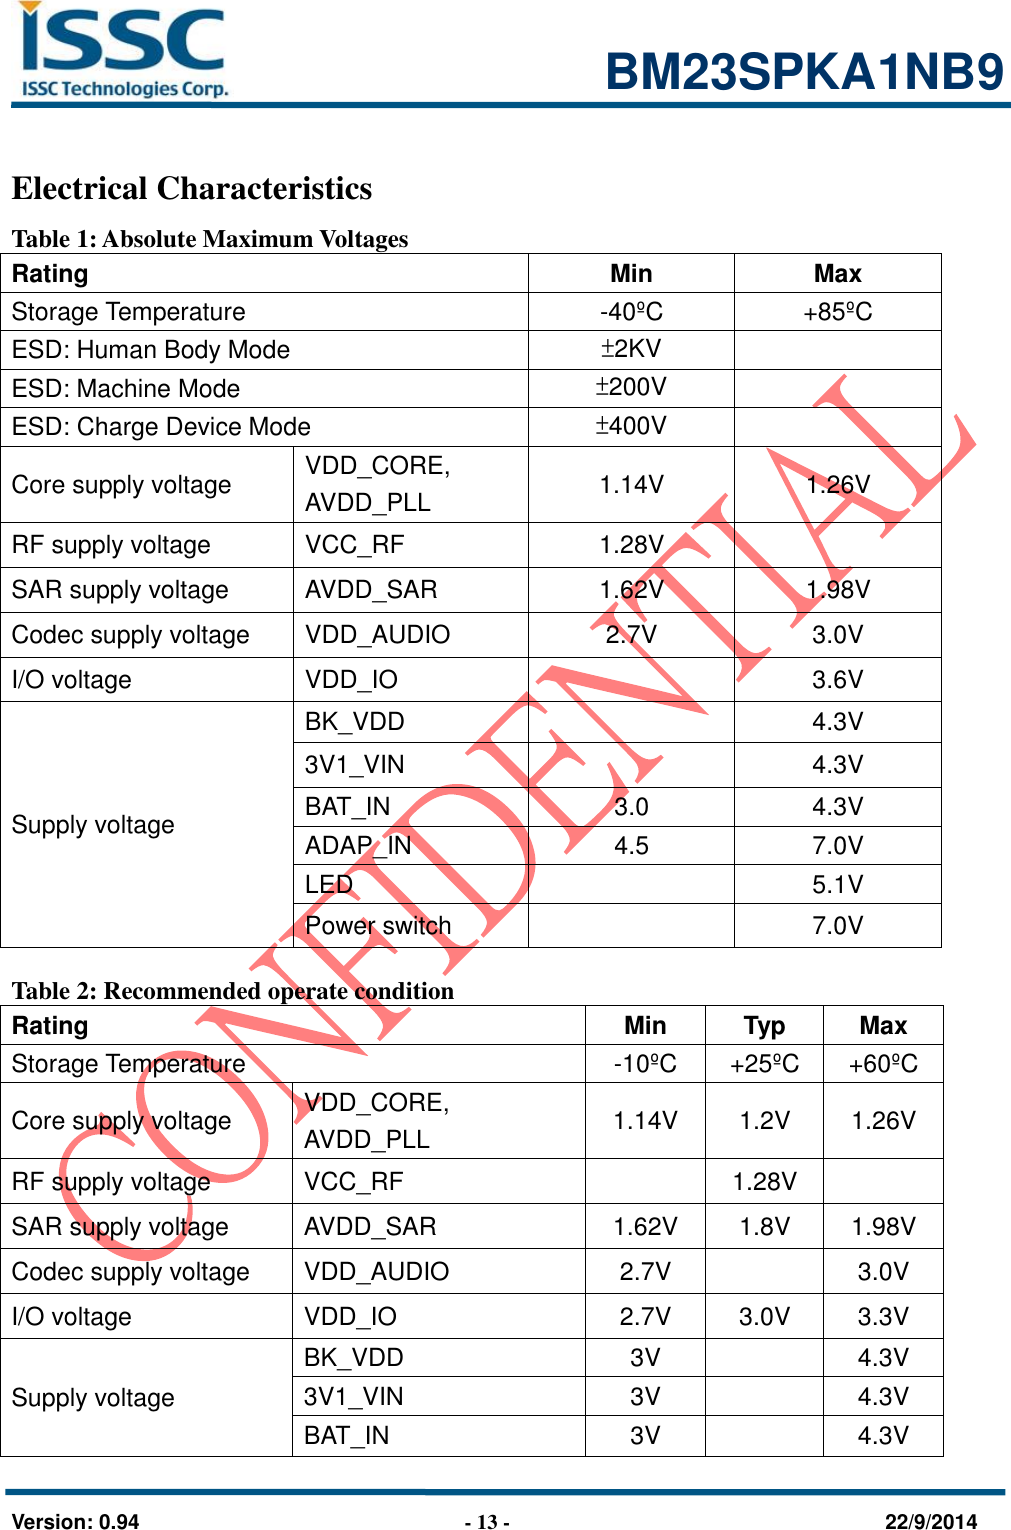                                                            BM23SPKA1NB9   Version: 0.94                              - 13 -                                    22/9/2014 Electrical Characteristics Table 1: Absolute Maximum Voltages Rating   Min Max Storage Temperature -40ºC +85ºC ESD: Human Body Mode ±2KV  ESD: Machine Mode ±200V  ESD: Charge Device Mode ±400V  Core supply voltage VDD_CORE, AVDD_PLL 1.14V 1.26V RF supply voltage VCC_RF 1.28V  SAR supply voltage AVDD_SAR 1.62V 1.98V Codec supply voltage VDD_AUDIO 2.7V 3.0V I/O voltage VDD_IO  3.6V Supply voltage BK_VDD  4.3V 3V1_VIN  4.3V BAT_IN 3.0 4.3V ADAP_IN 4.5 7.0V LED  5.1V Power switch  7.0V  Table 2: Recommended operate condition Rating   Min Typ Max Storage Temperature -10ºC +25ºC +60ºC Core supply voltage VDD_CORE, AVDD_PLL 1.14V 1.2V 1.26V RF supply voltage VCC_RF  1.28V  SAR supply voltage AVDD_SAR 1.62V 1.8V 1.98V Codec supply voltage VDD_AUDIO 2.7V  3.0V I/O voltage   VDD_IO 2.7V 3.0V 3.3V Supply voltage BK_VDD 3V  4.3V 3V1_VIN 3V  4.3V BAT_IN 3V  4.3V 